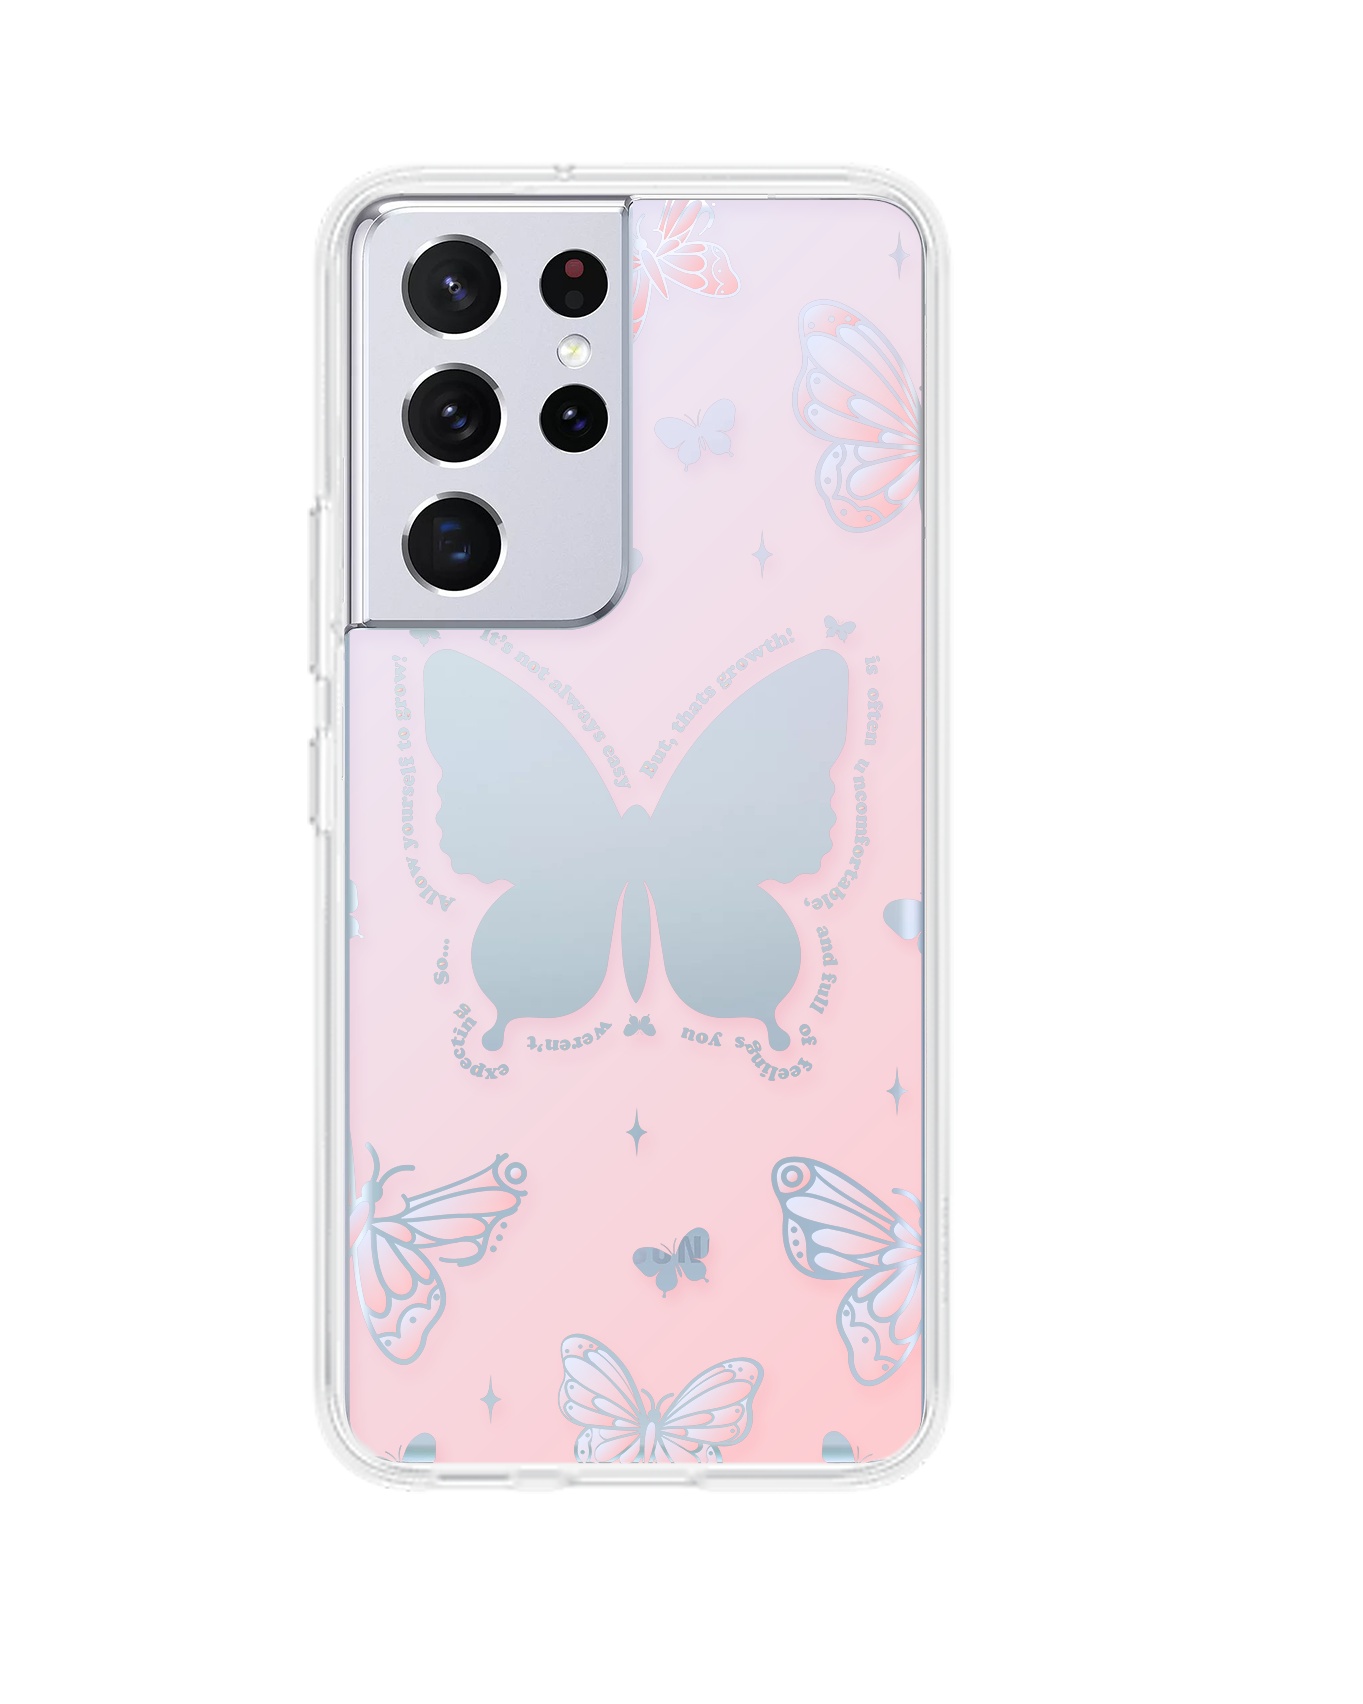 Android Rearguard Hybrid Case - Butterfly Effect 2.0